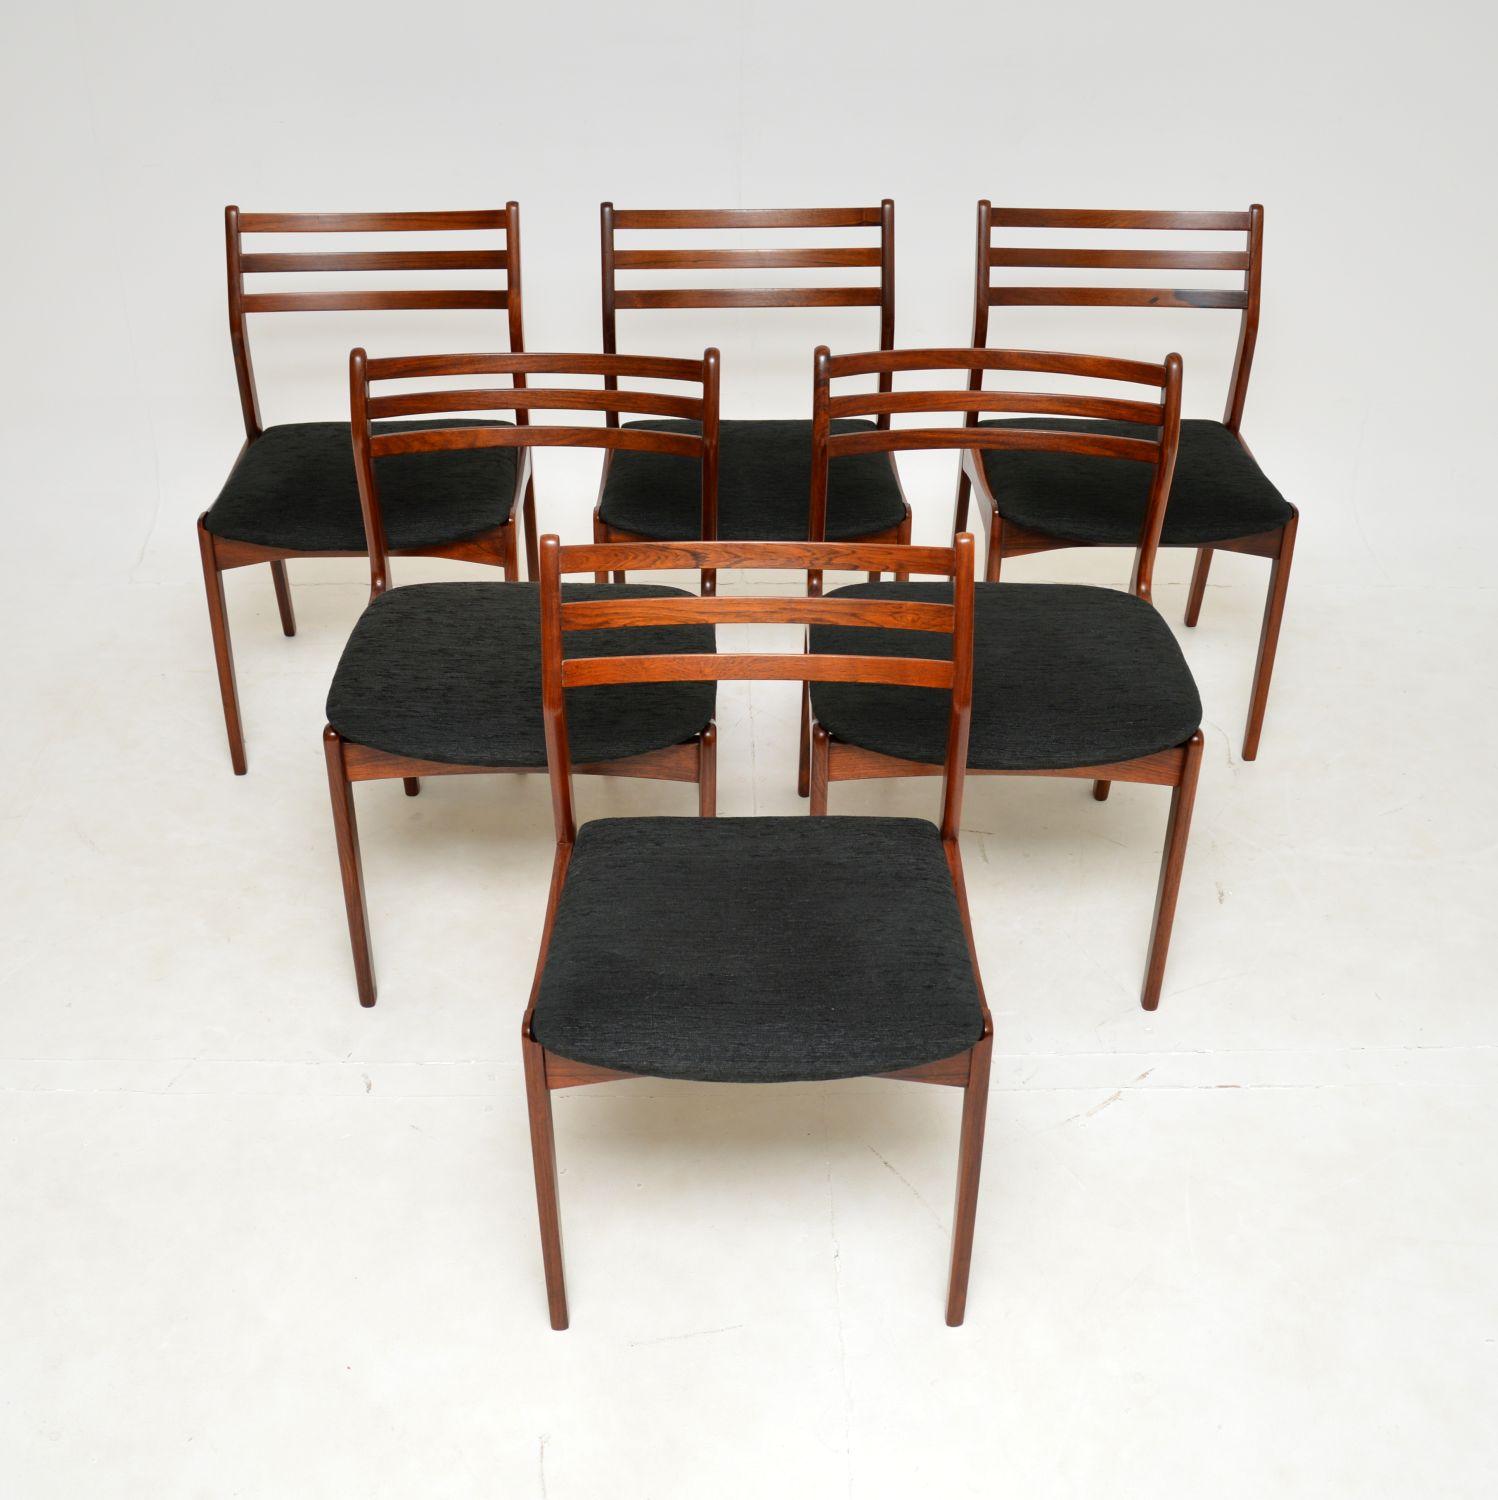 An extremely stylish and well made set of six vintage Danish dining chairs, dating from the 1960s.

This consists of a pair of chairs by P.E Jorgensen for Farso Stolefabrik, and another four very similar chairs by H. Vestervig Eriksen for Brdr.